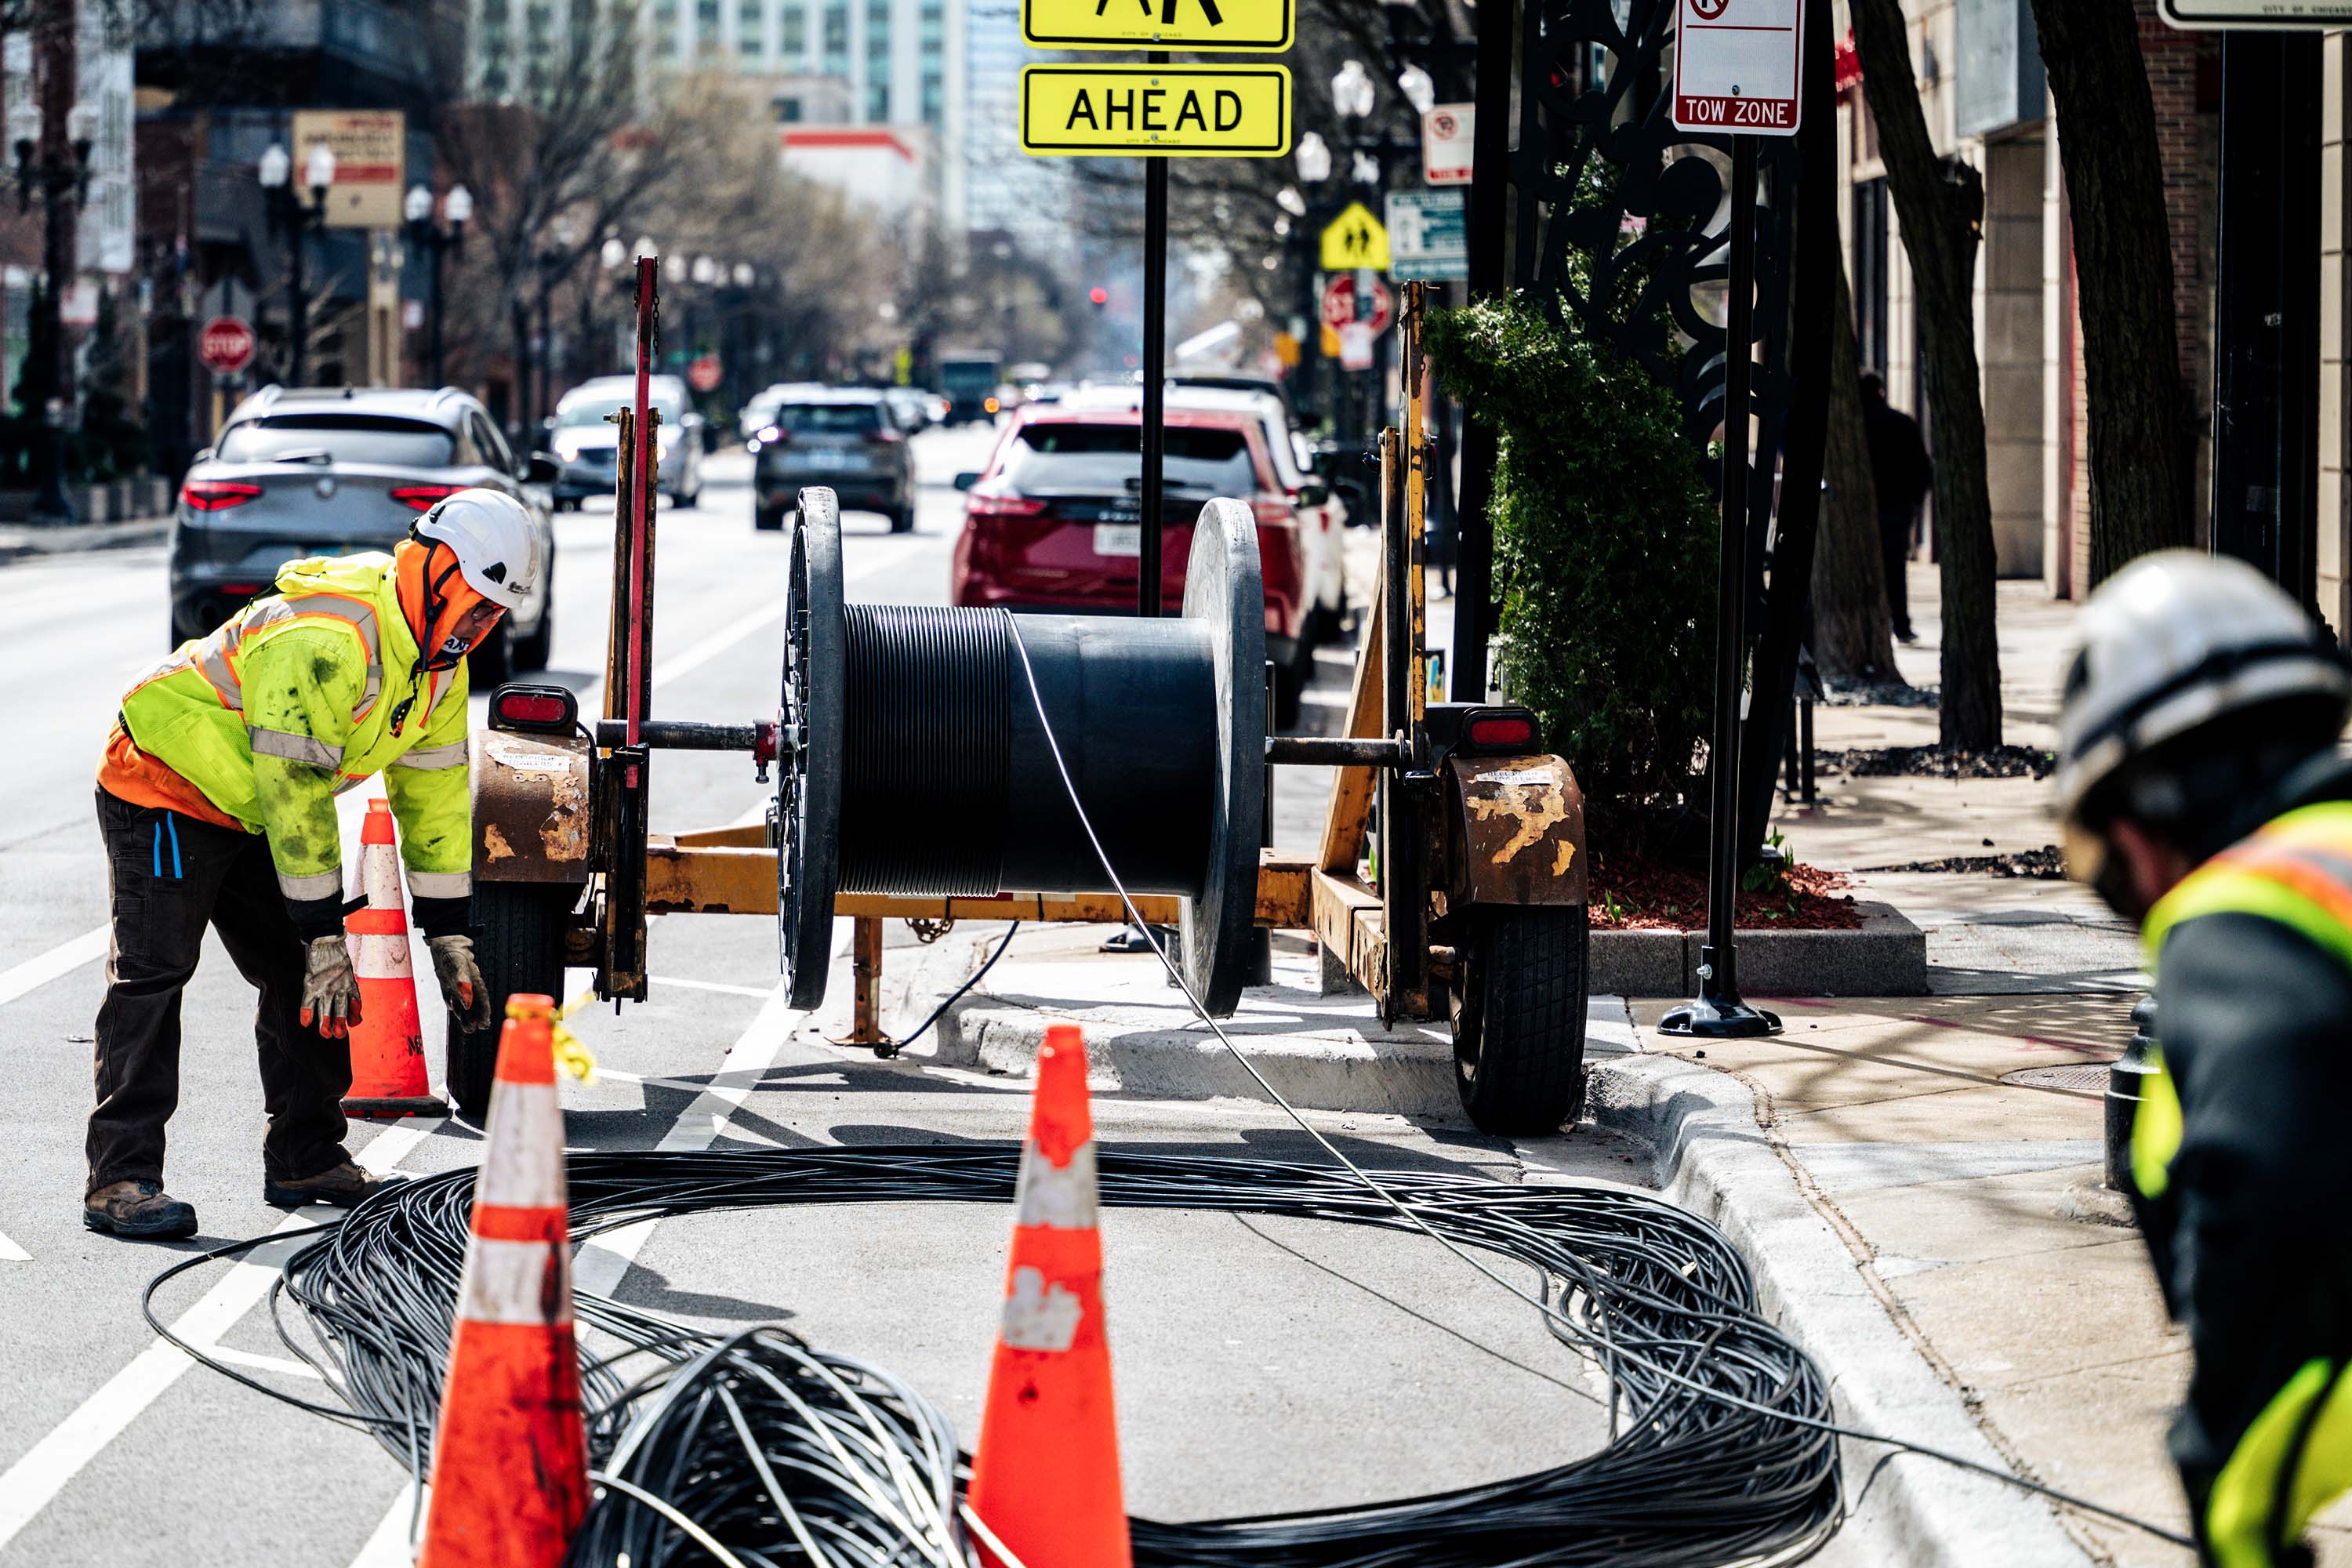 Two workers in bright safety gear is handling cables on a city street, surrounded by traffic cones for safety.